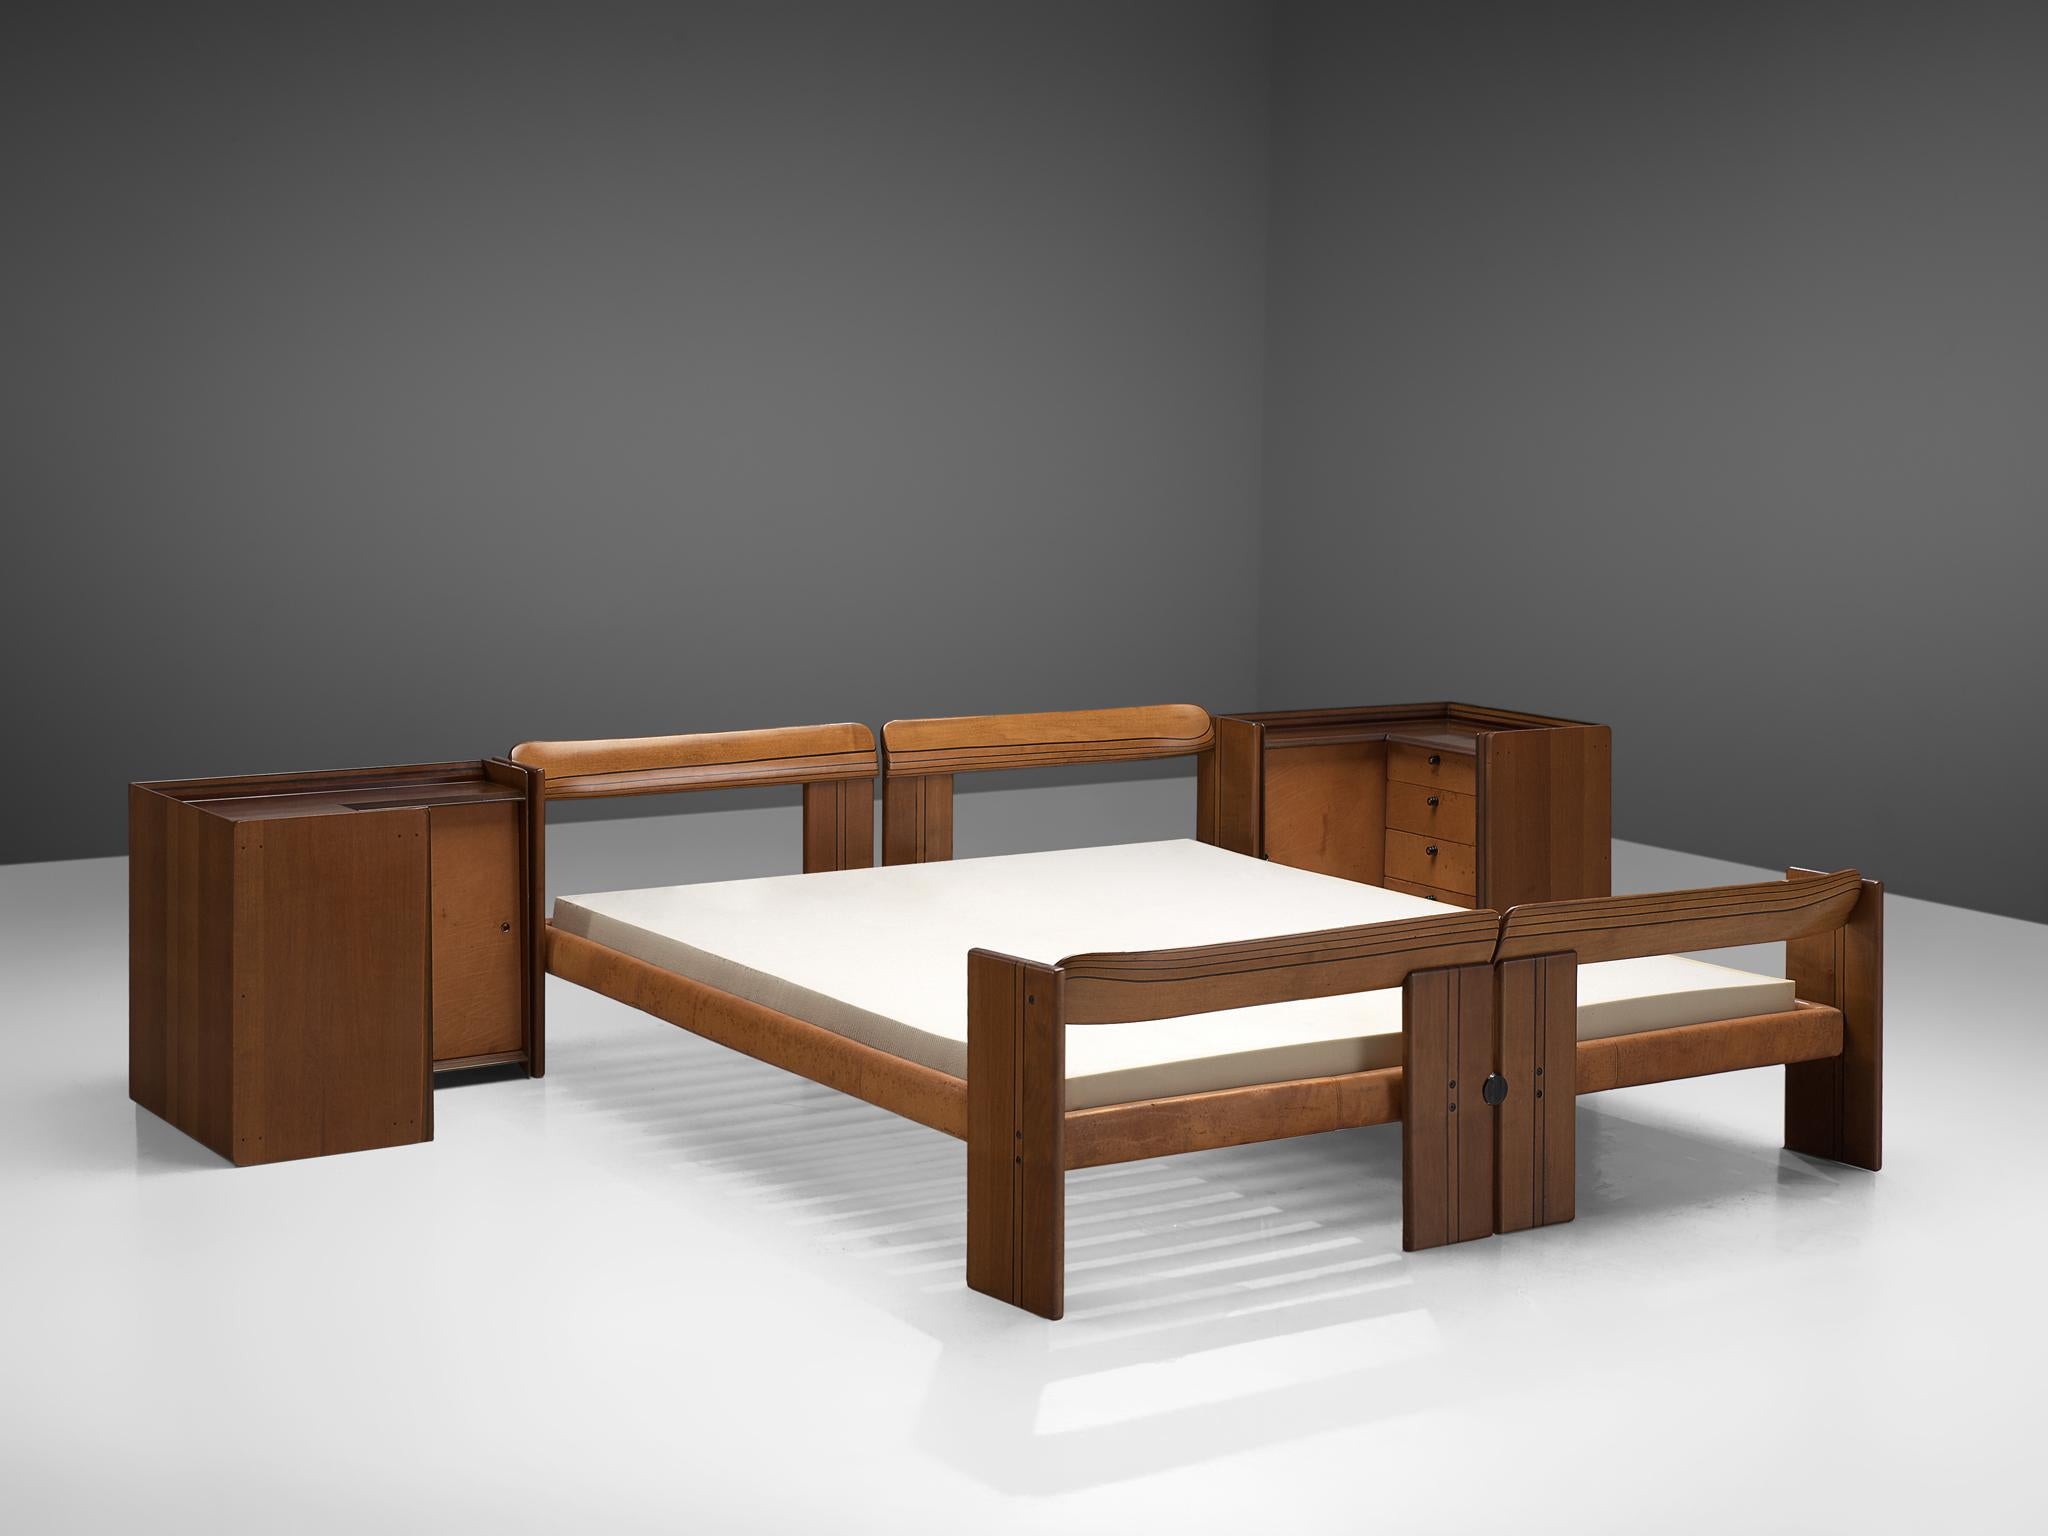 Afra & Tobia Scarpa, 'Artona' bed with nightstands, walnut and metal, Italy, 1975.

The Artona line by the Scarpa duo was in fact the first line ever produced by Maxalto, the specialist division of B&B Italia. Maxalto was originally set up in 1975